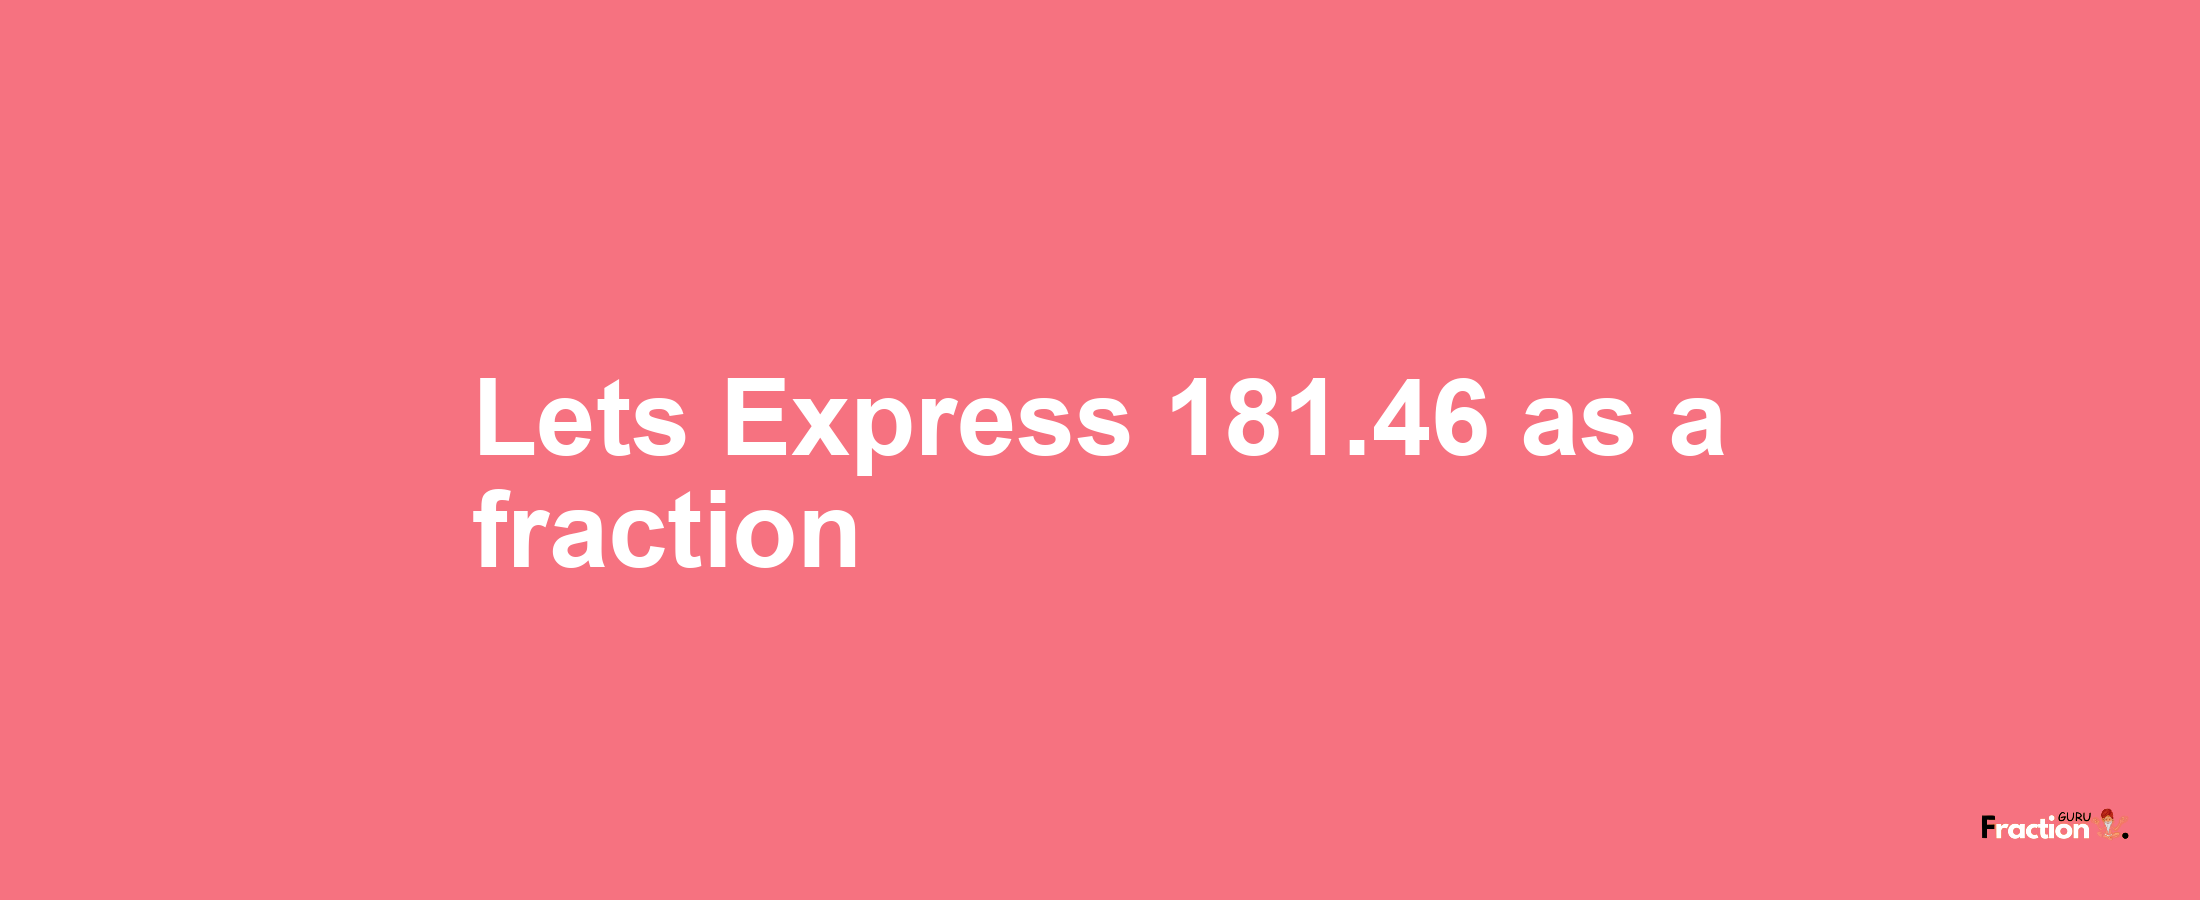 Lets Express 181.46 as afraction